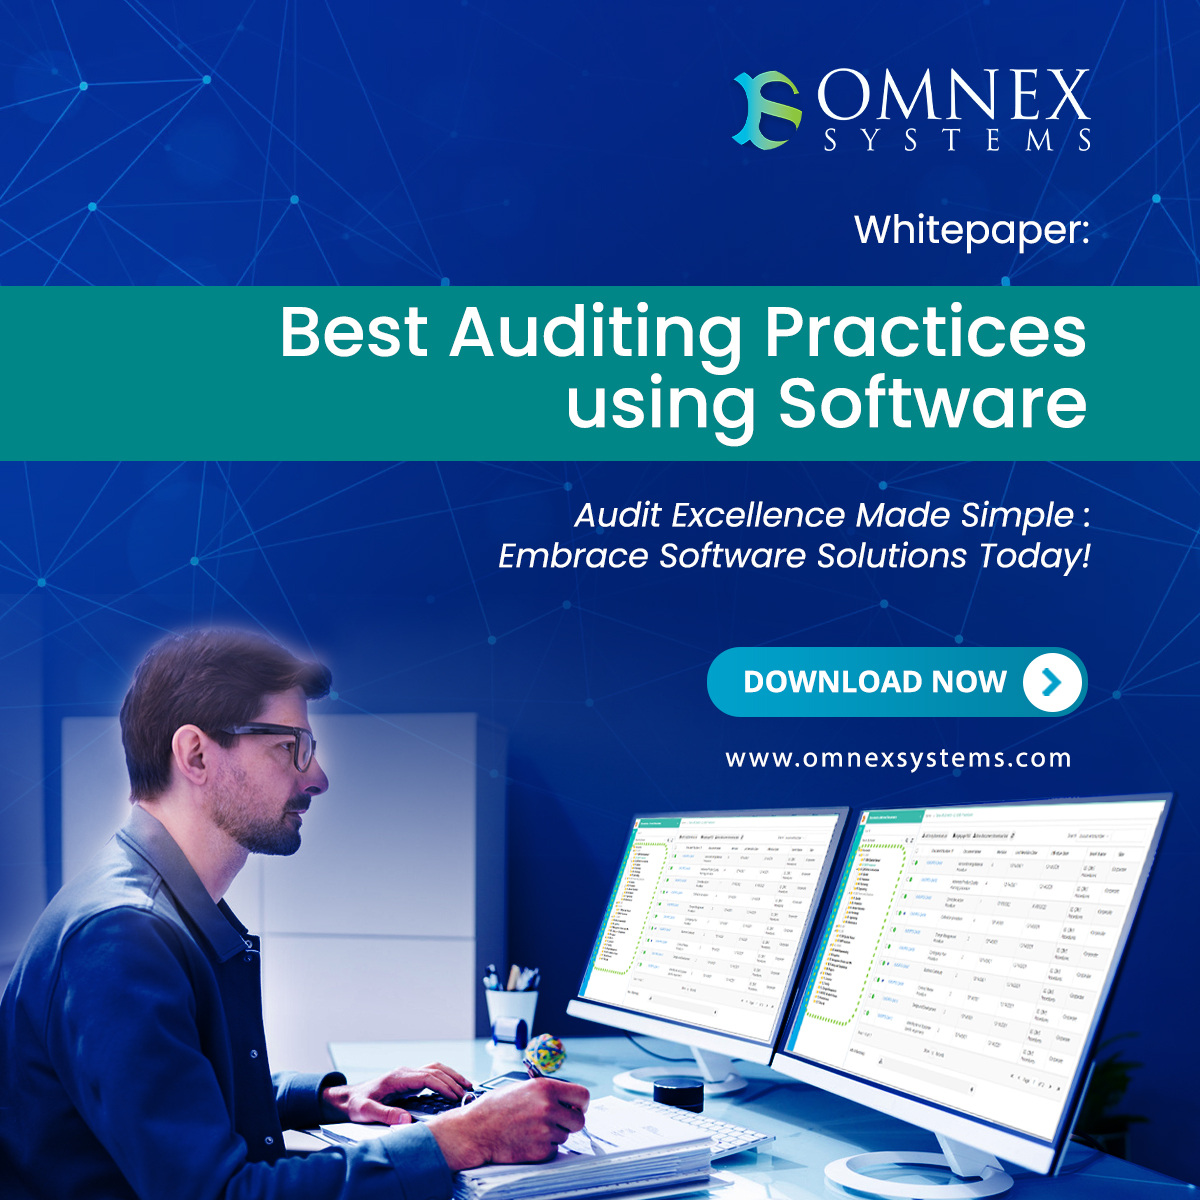 Discover the Best practices from Roy Gray, Omnex Consultant, on optimizing your auditing process.
𝐂𝐡𝐞𝐜𝐤 𝐨𝐮𝐭 𝐨𝐮𝐫 𝐰𝐡𝐢𝐭𝐞 𝐩𝐚𝐩𝐞𝐫 𝐟𝐨𝐫 𝐦𝐨𝐫𝐞 𝐢𝐧𝐬𝐢𝐠𝐡𝐭𝐬.
hubs.li/Q02tBglf0

#Whitepaper #AuditAutomation #TechAudit #DigitalAudit #SoftwareAudit #Audit